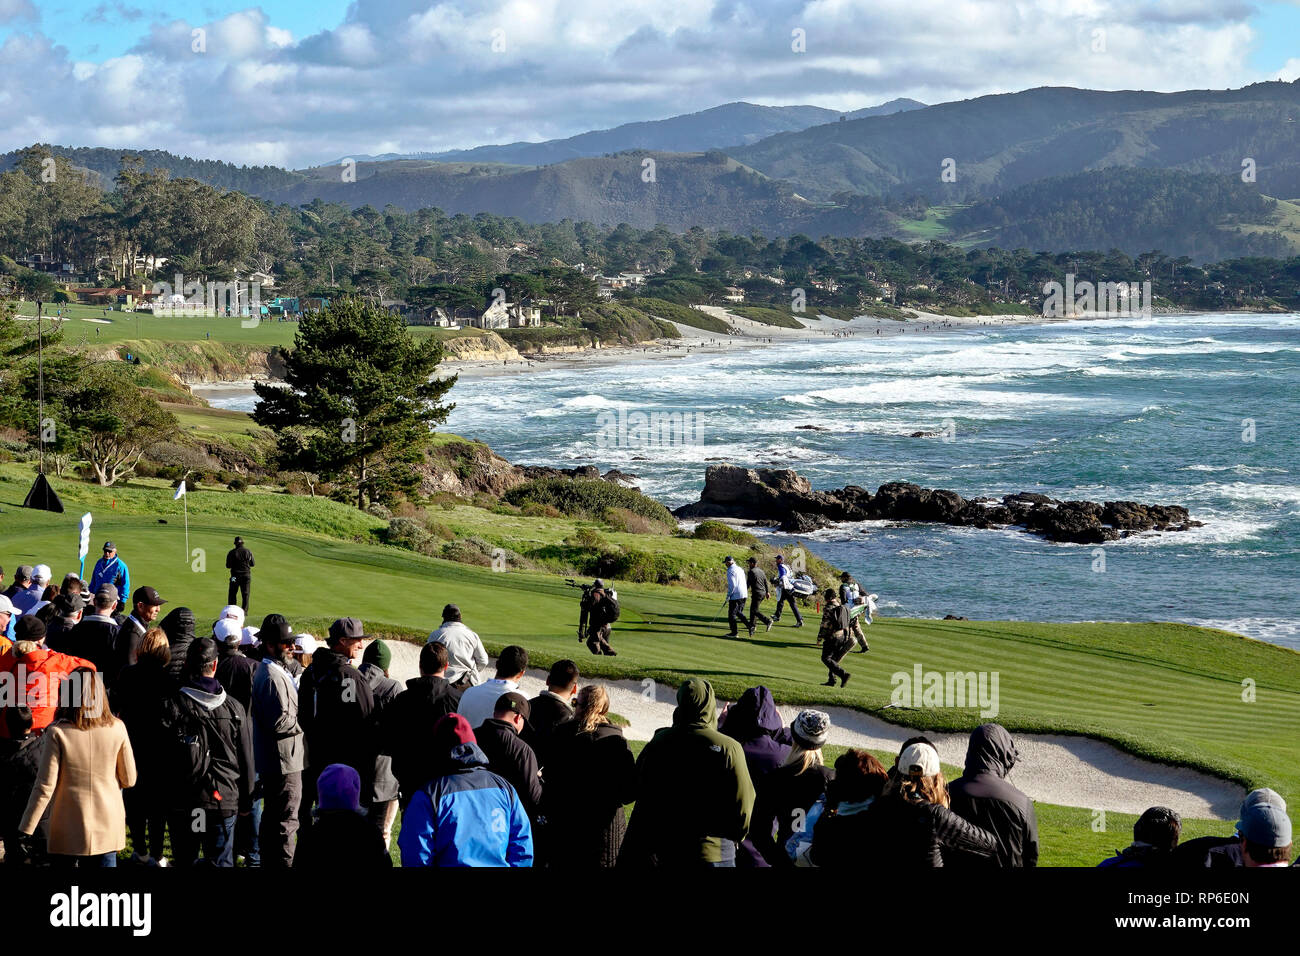 11th February, 2019  Pebble Beach Golf Links, CA, USA  The 8th hole at Pebble Beach Golf Course with a view to Carmel Beach during the AT&T Pebble Bea Stock Photo